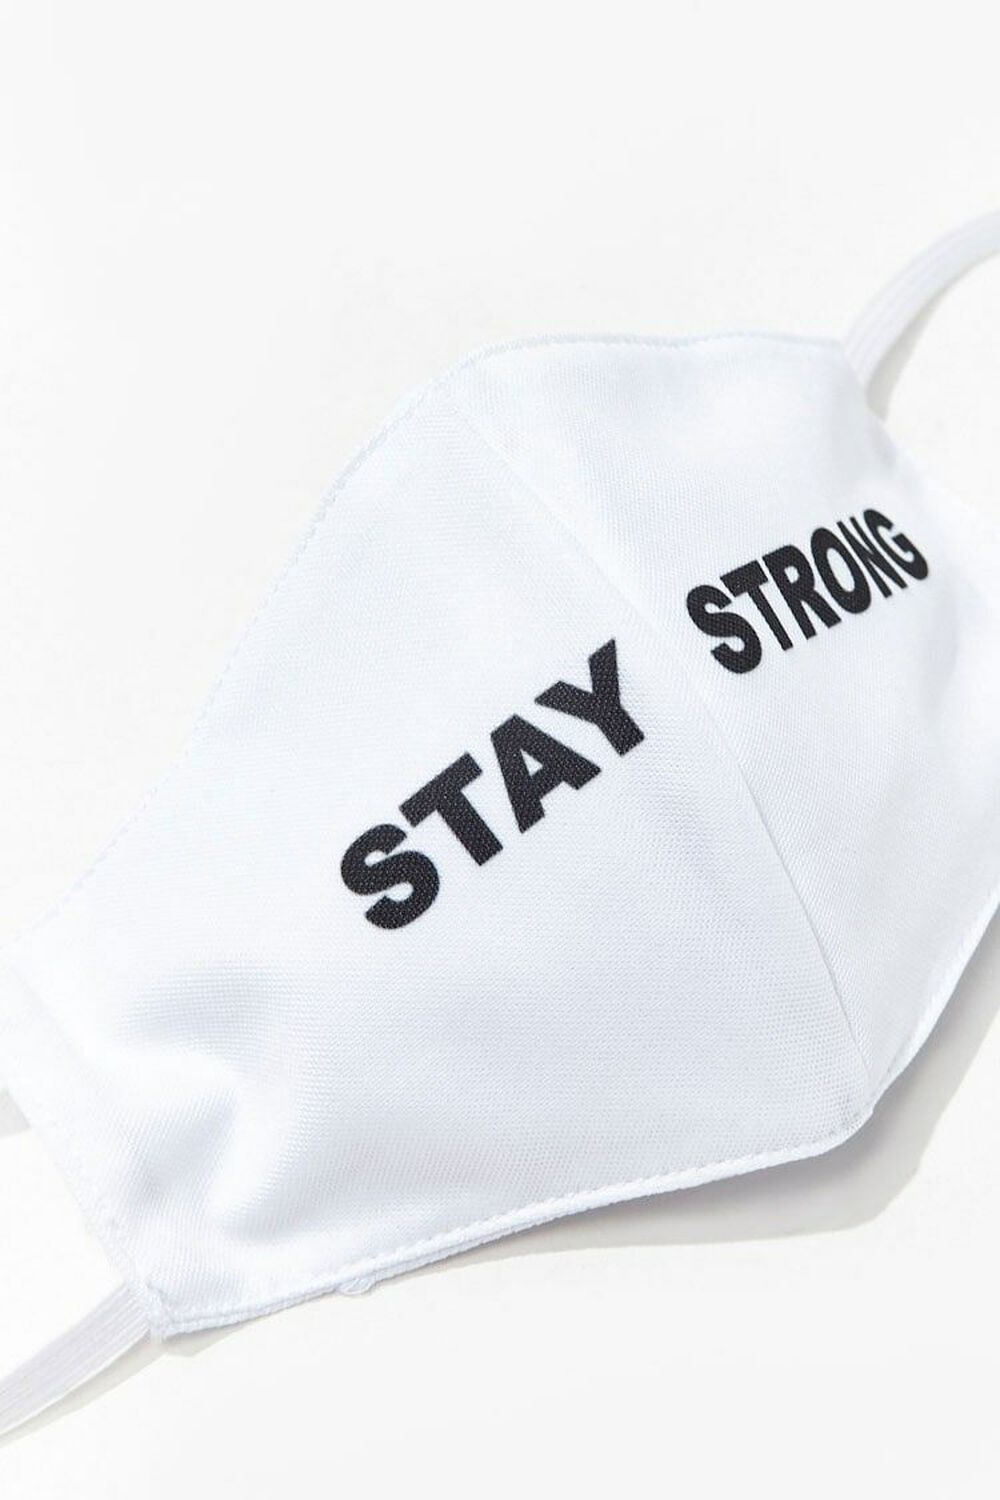 Stay Strong Face Mask, image 1